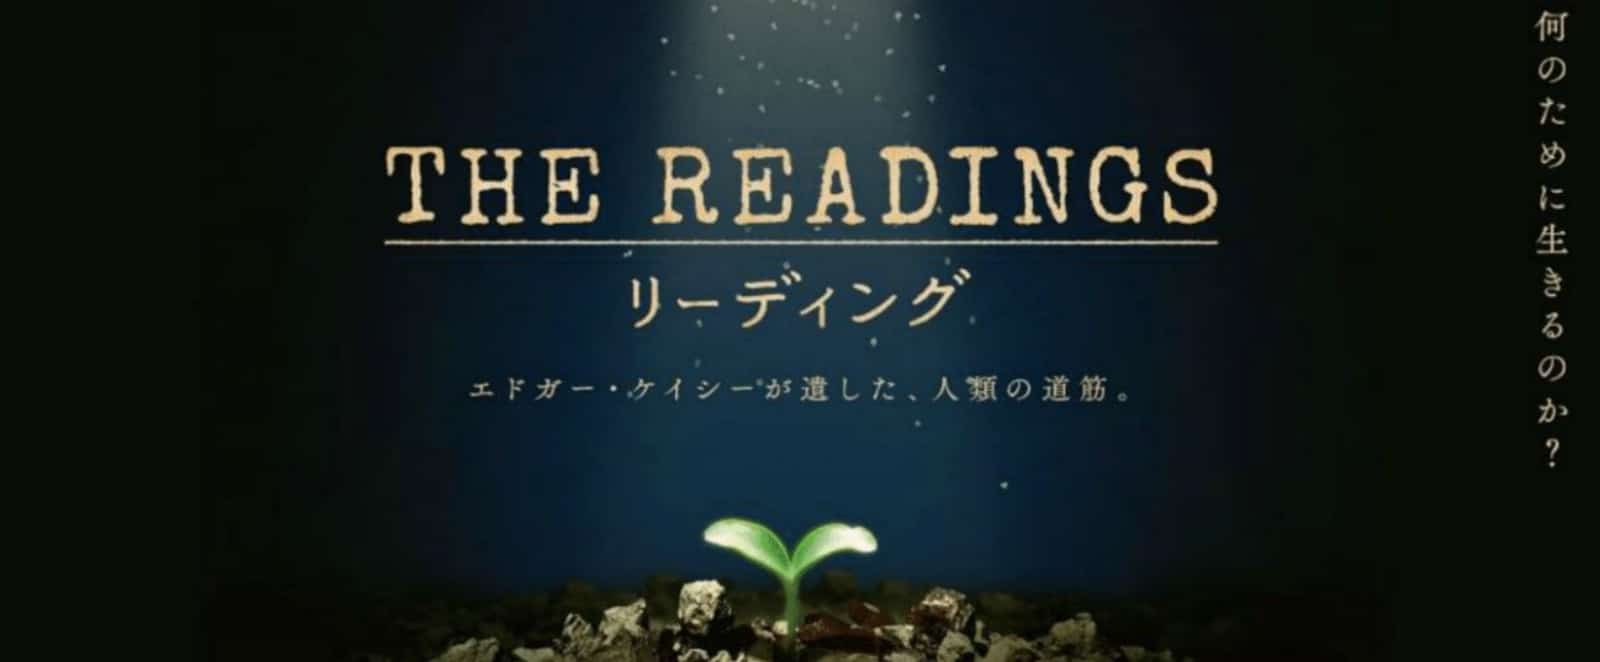 “The Readings”